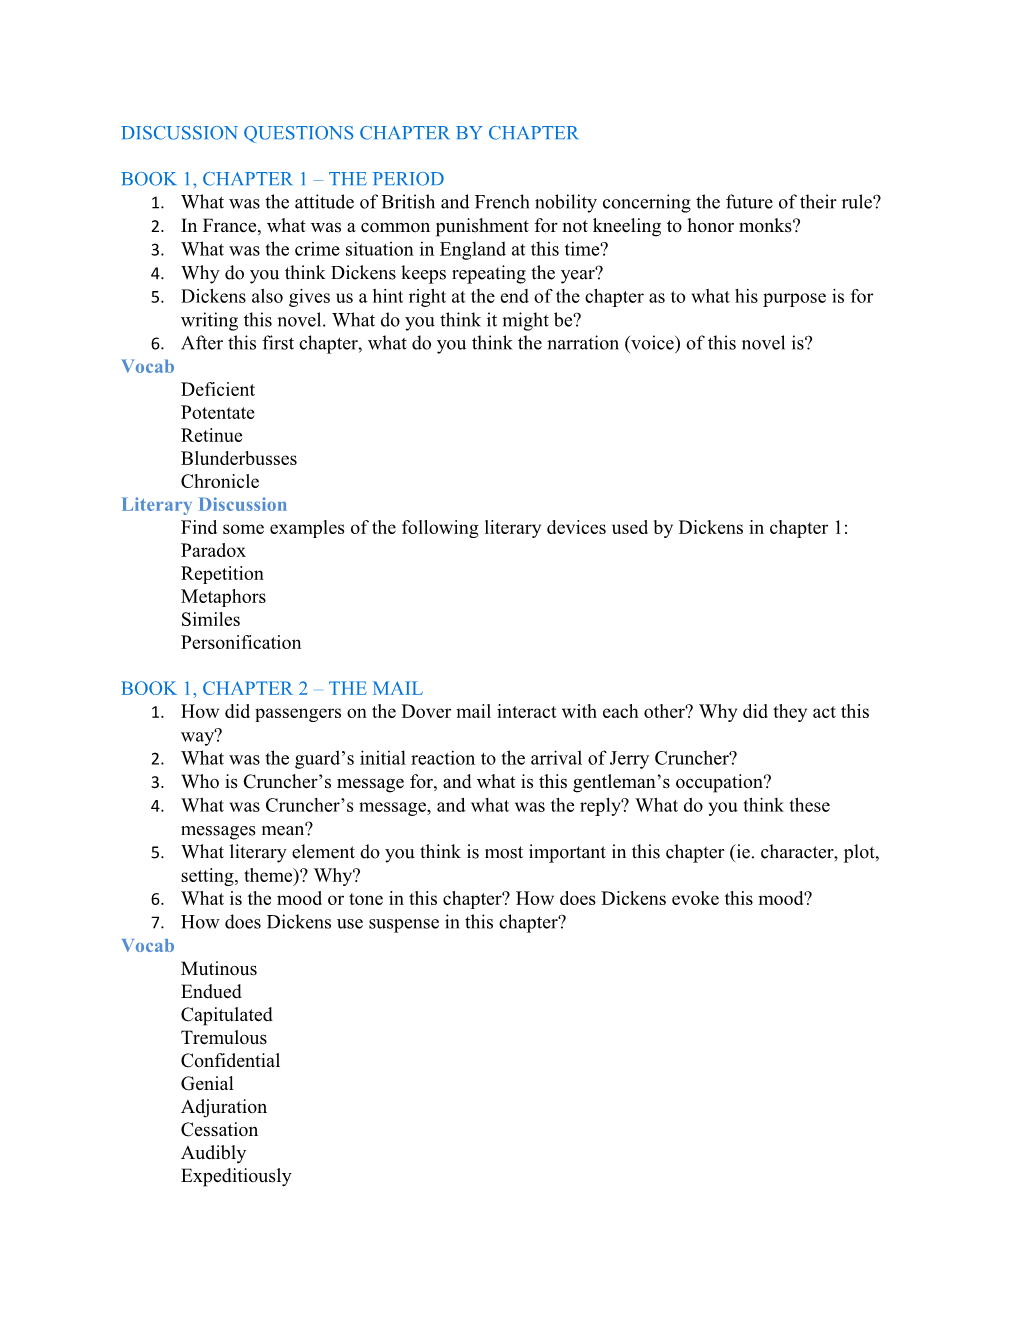 Discussion Questions Chapter by Chapter